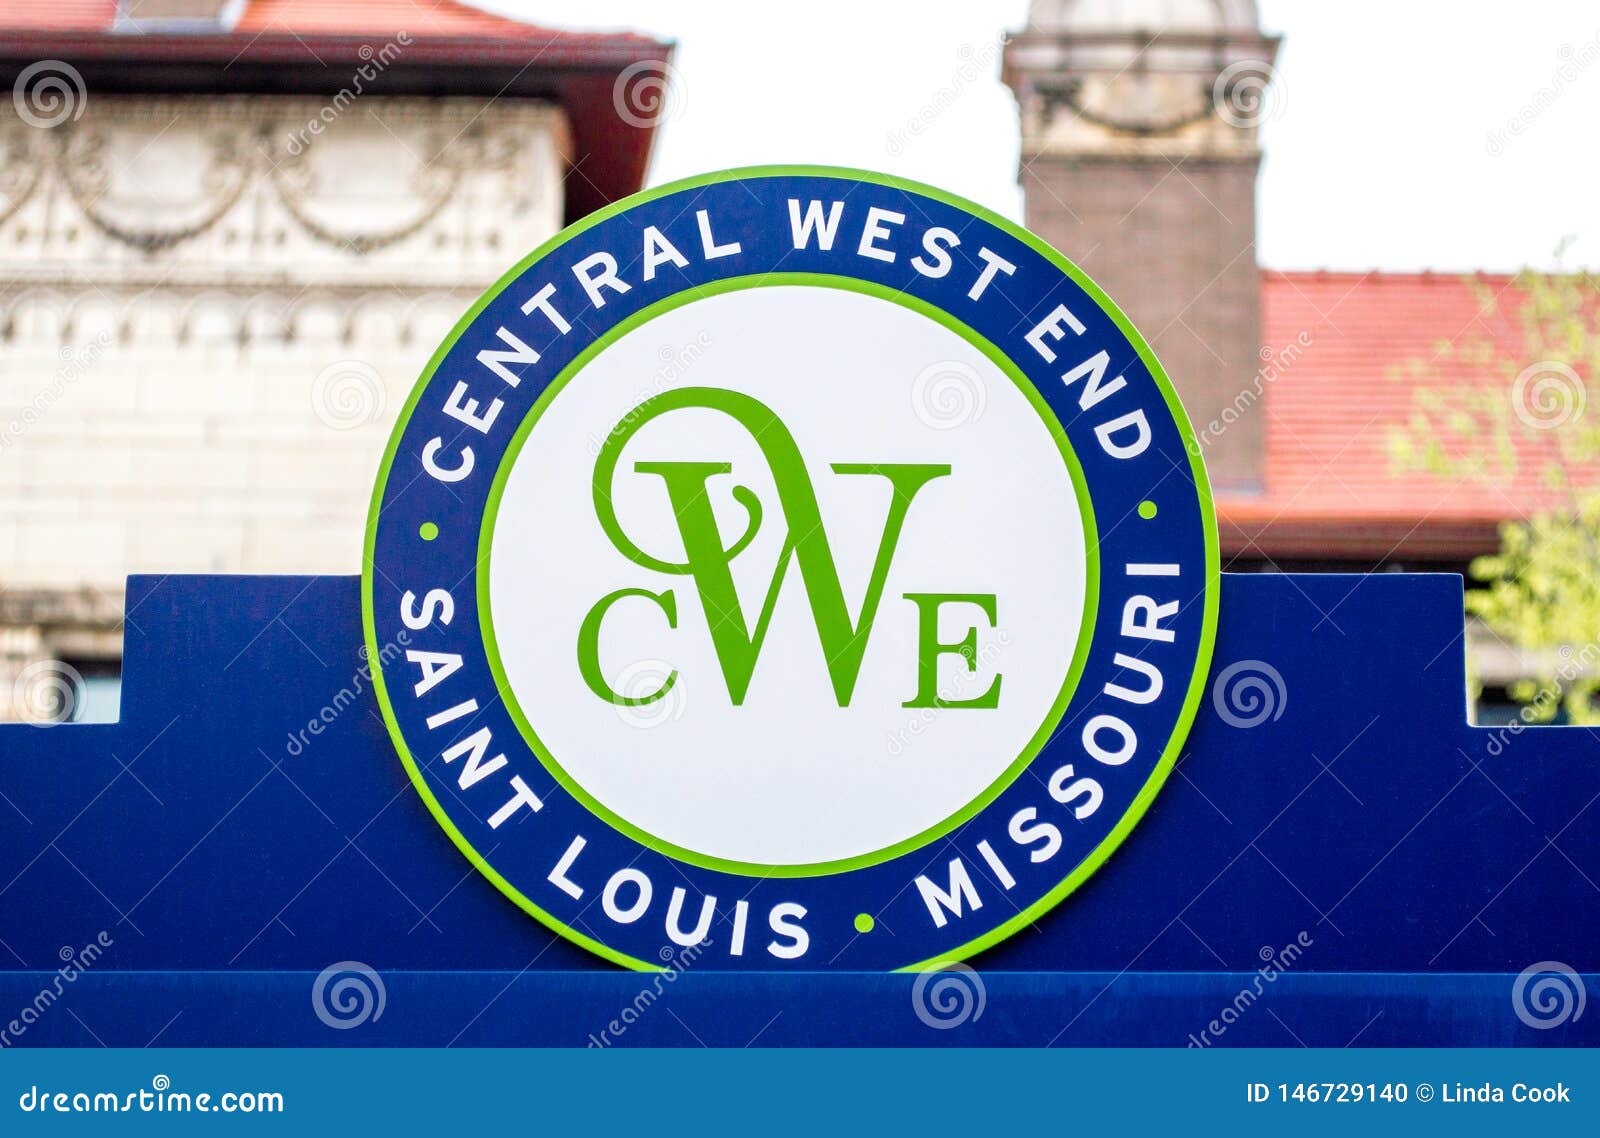 Round Welcome Sign In The St. Louis Central West End Area Editorial Image - Image of business ...